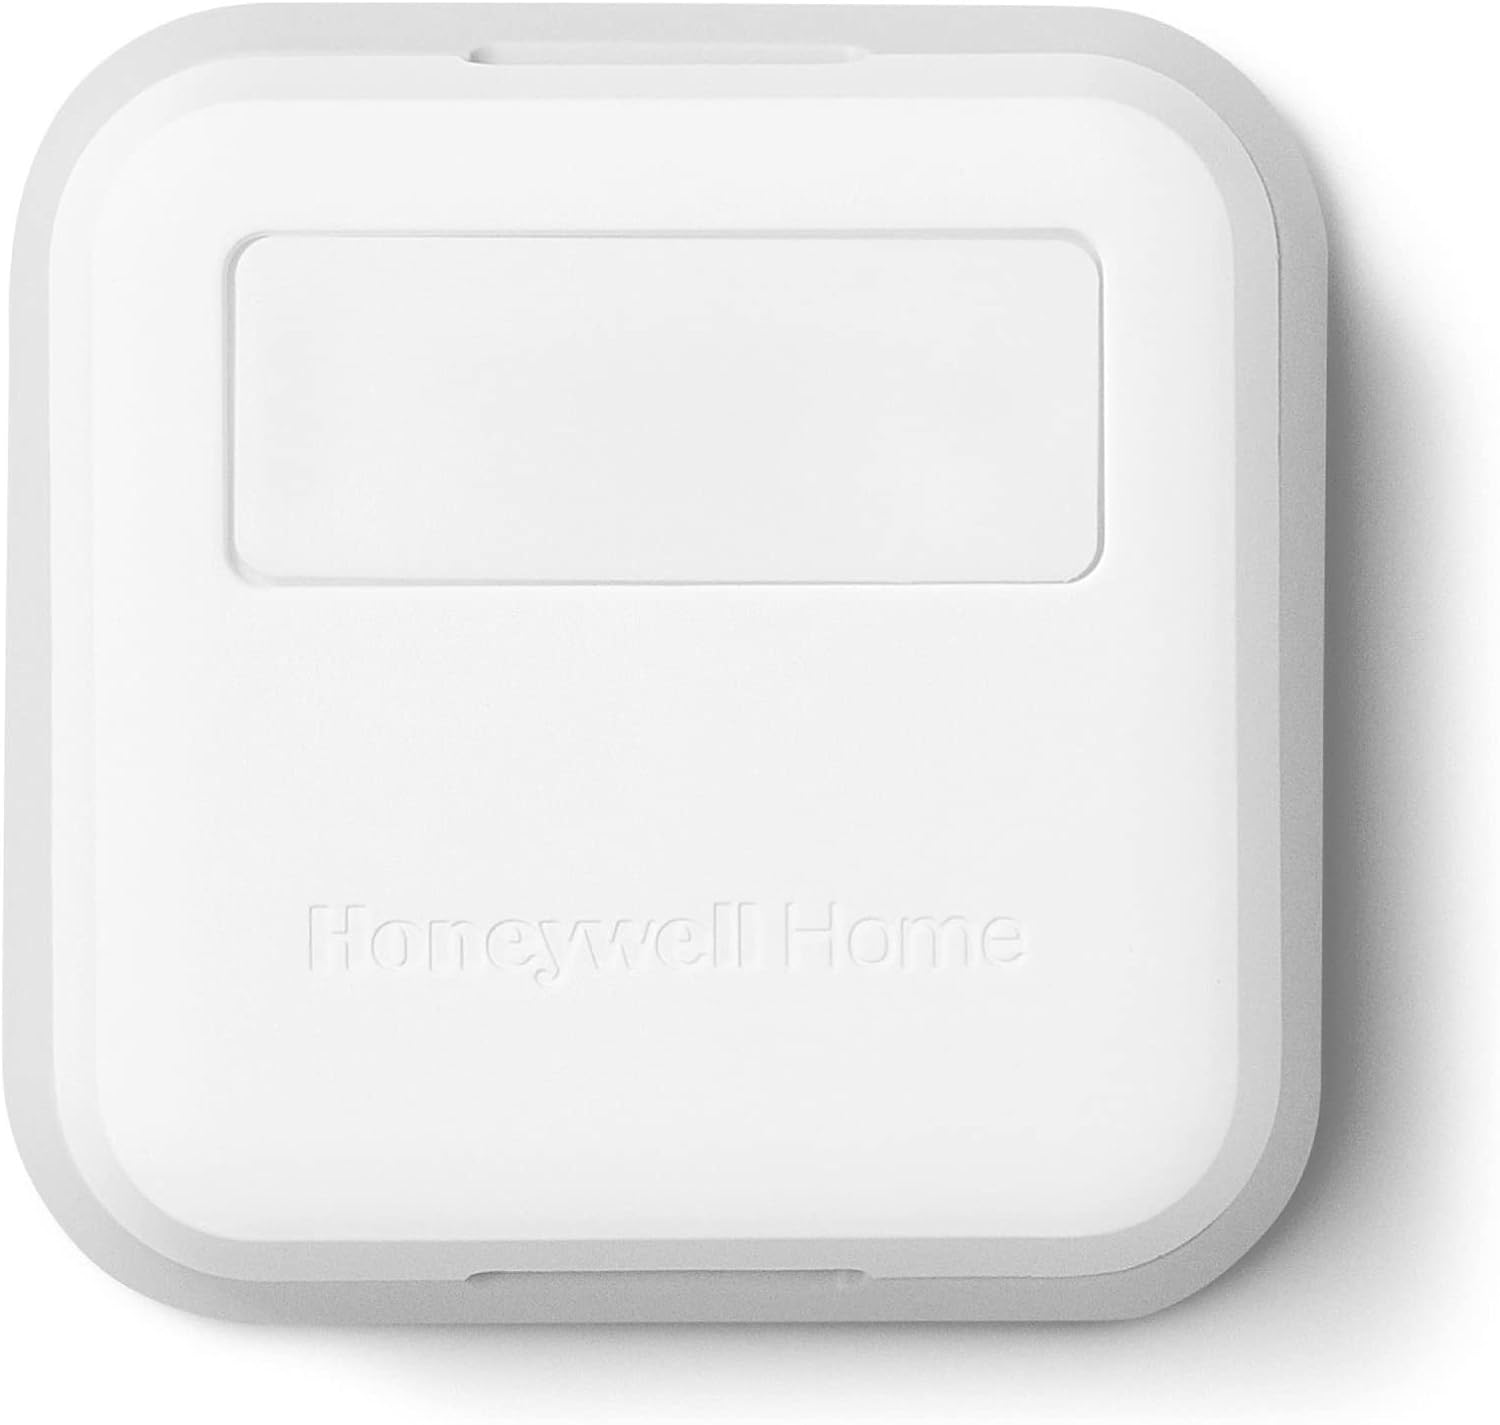 Honeywell Home RCHTSENSOR-1PK, Smart Room Sensor Works with T9/T10 WiFi Smart Thermostats - $29.99, 27% off of msrp 40.99